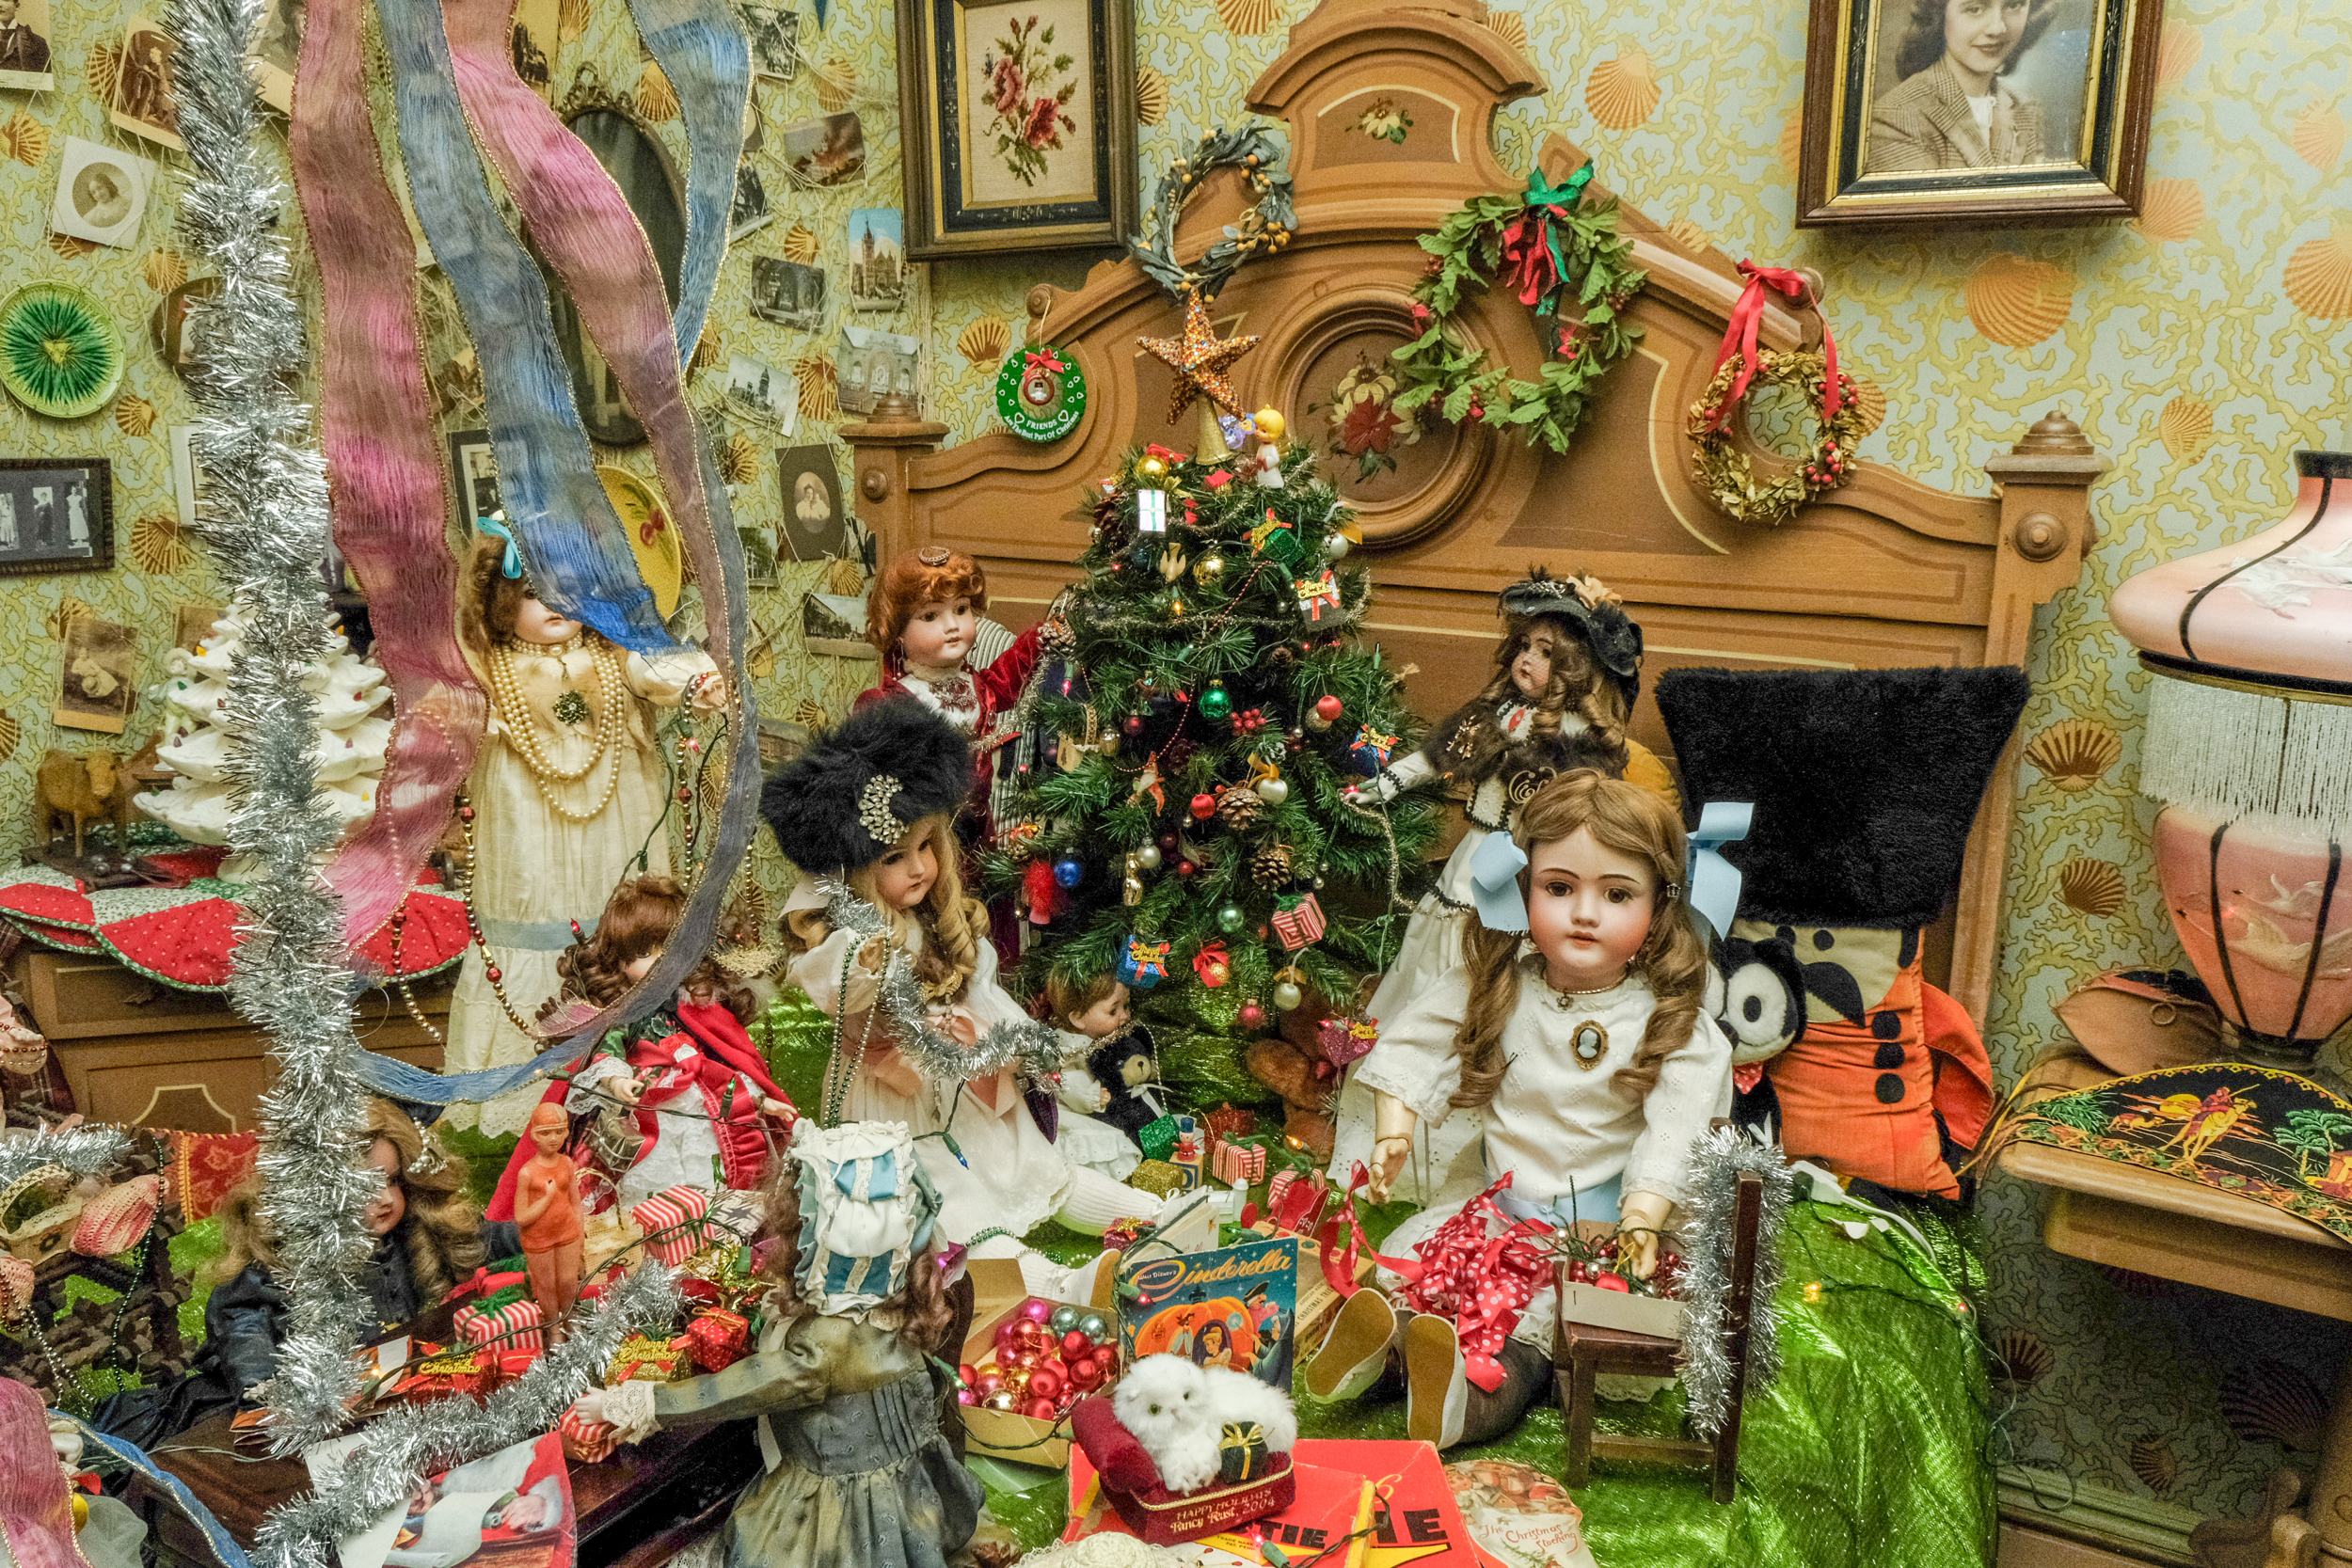 An antique wooden bed has a collection of antique objects on it, including vintage dolls and Christmas decorations.